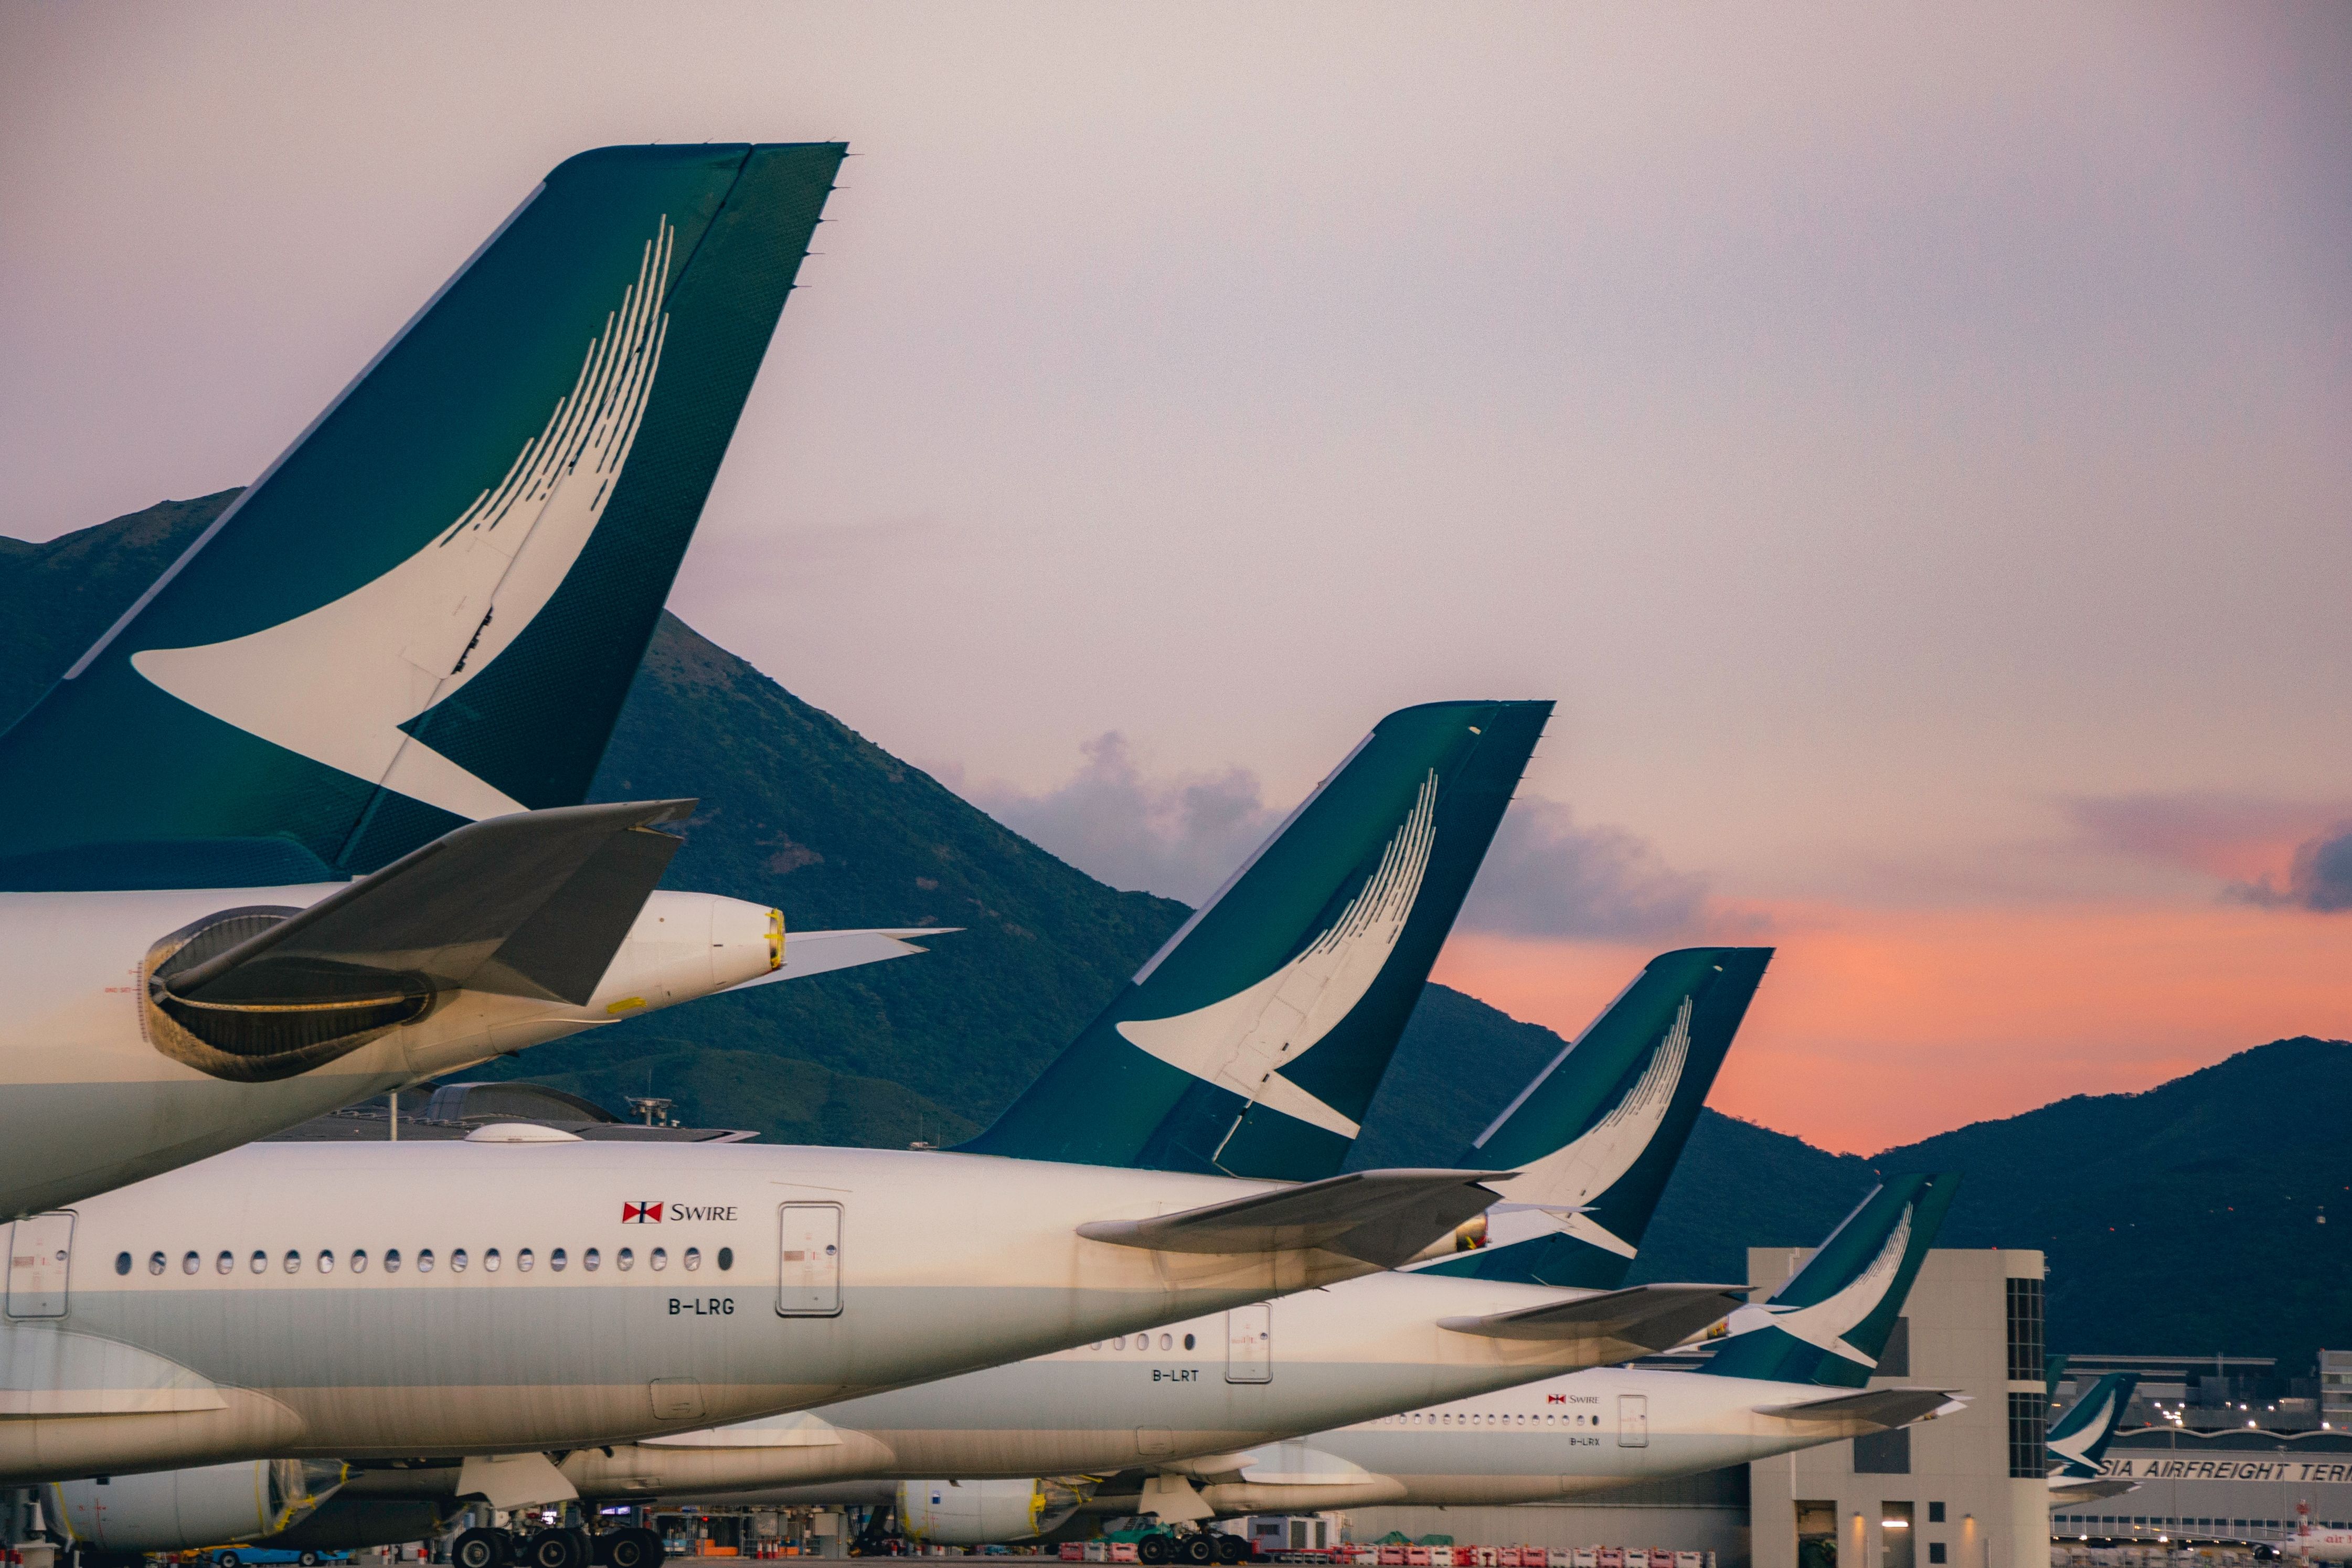 Several Cathay Pacific Aircraft parked side by side.